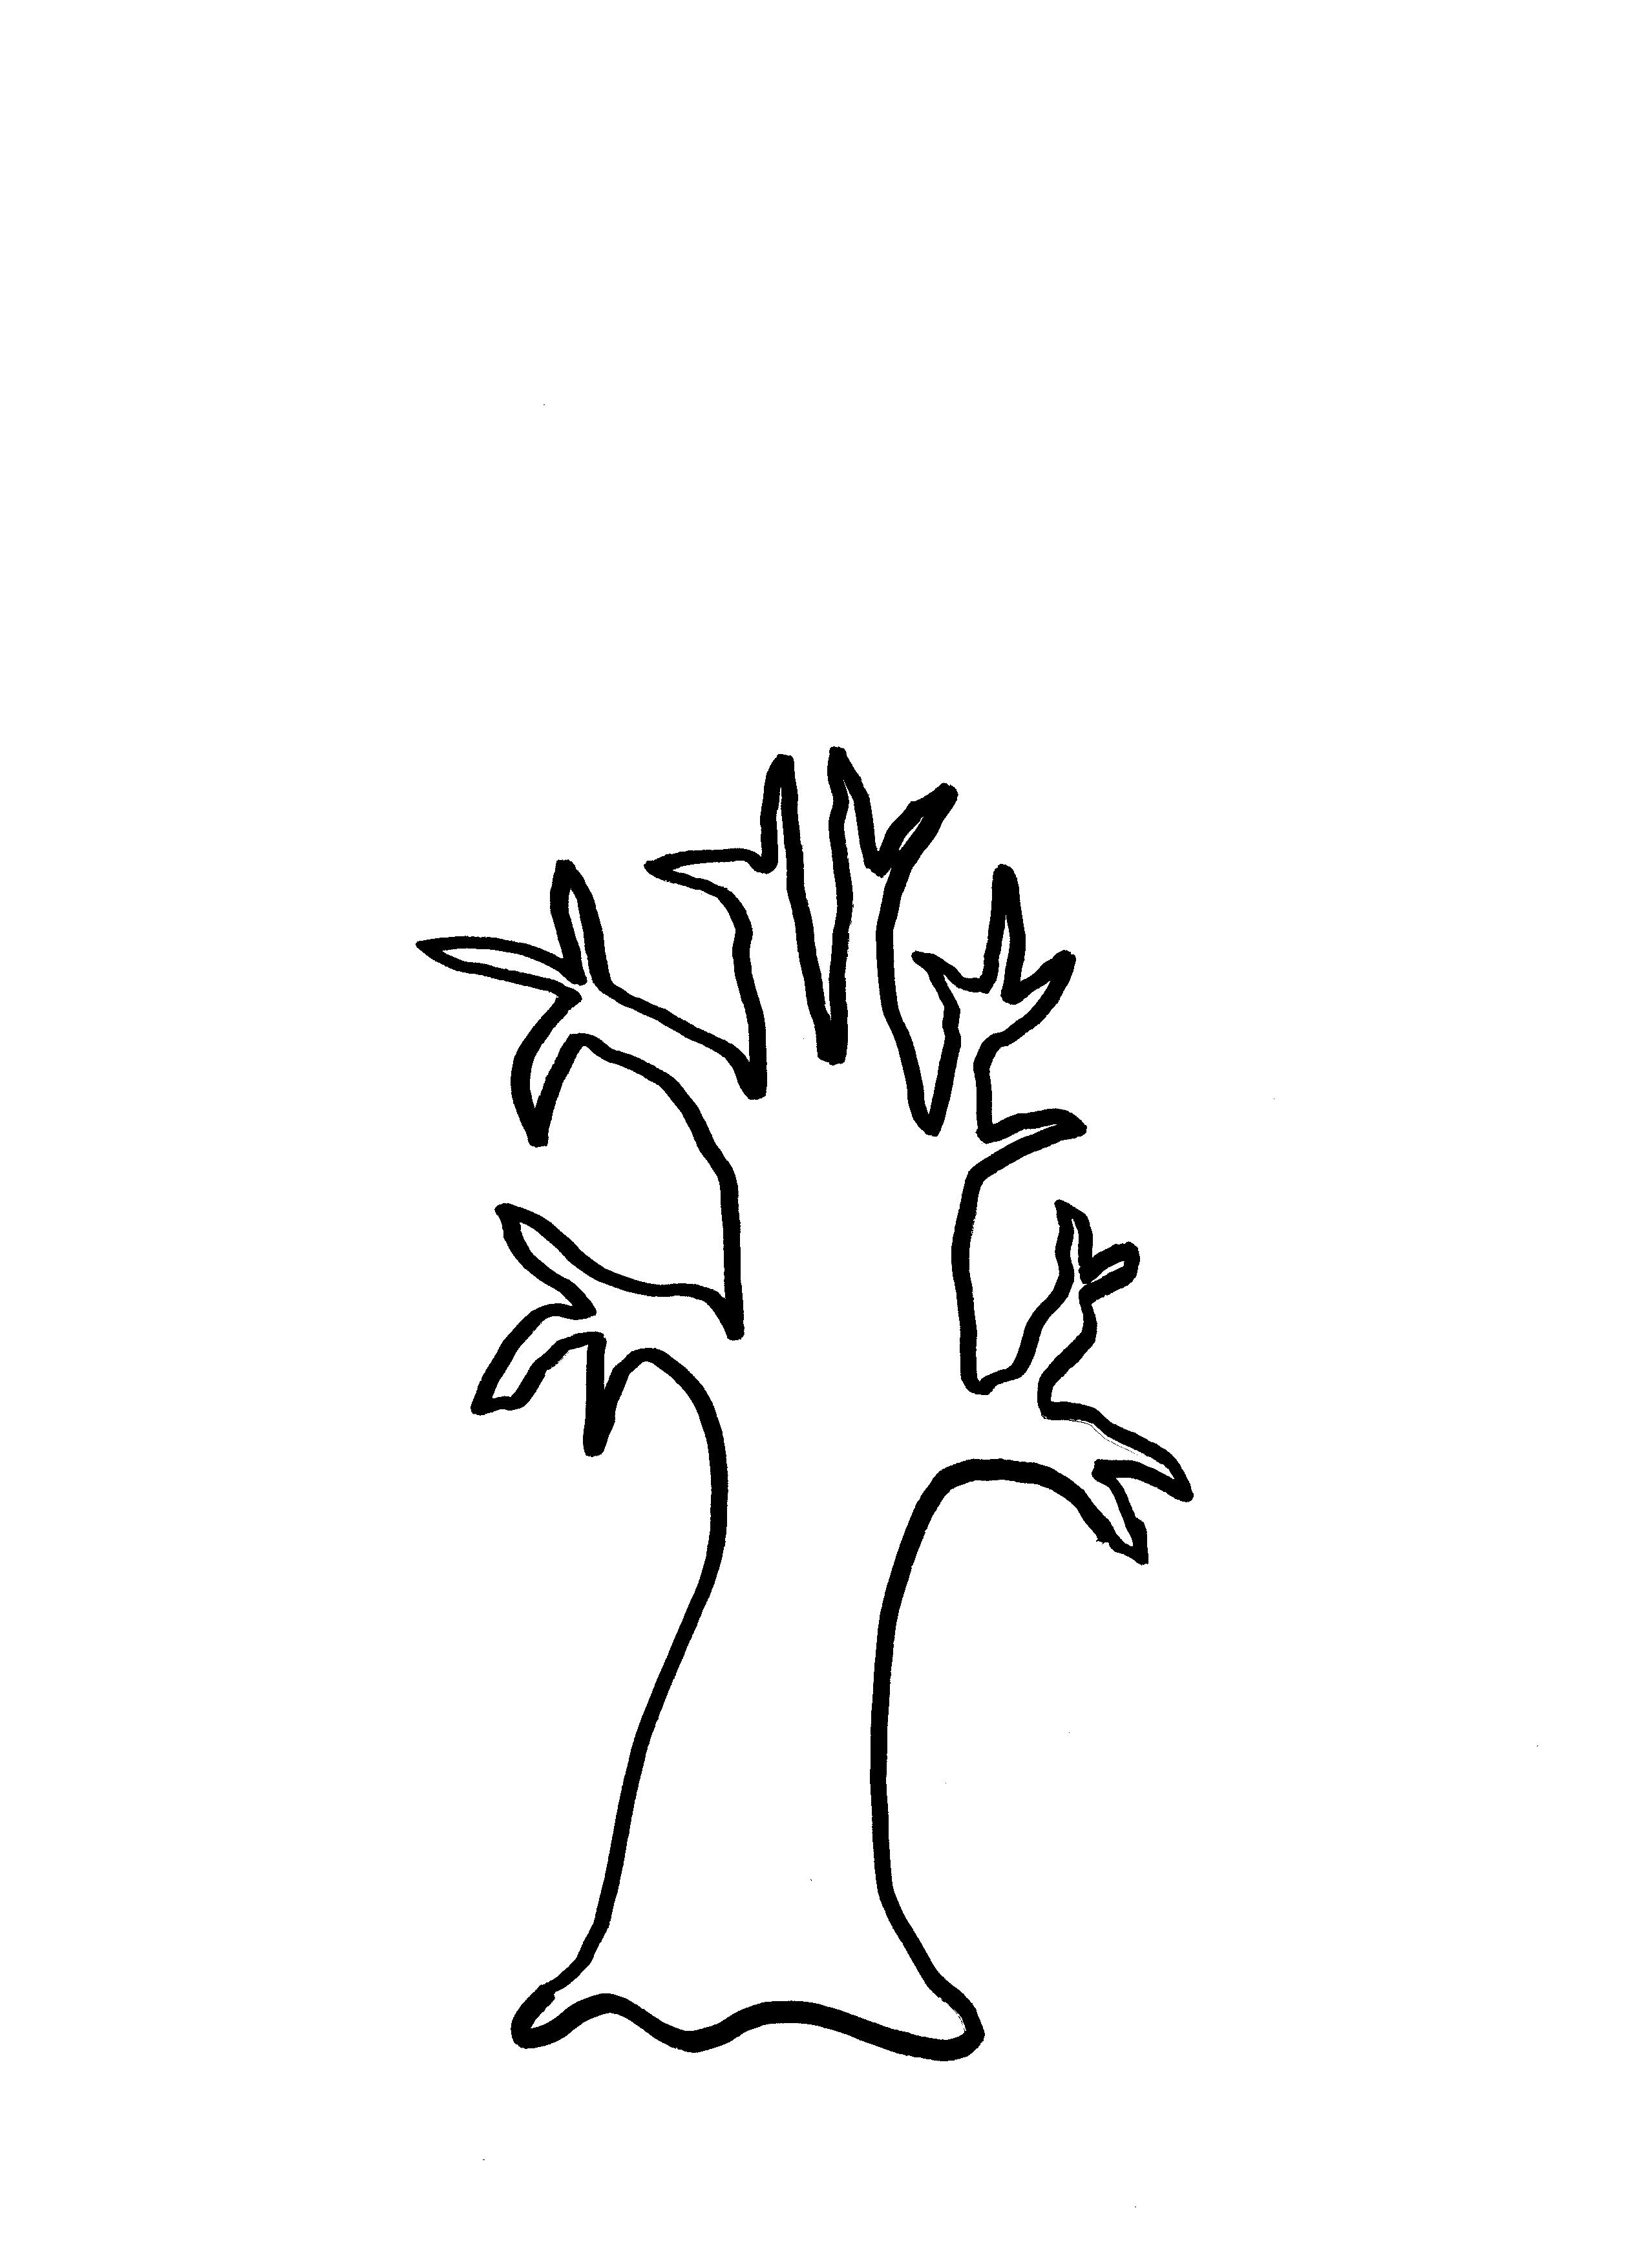 Printable Tree Trunk - ClipArt Best